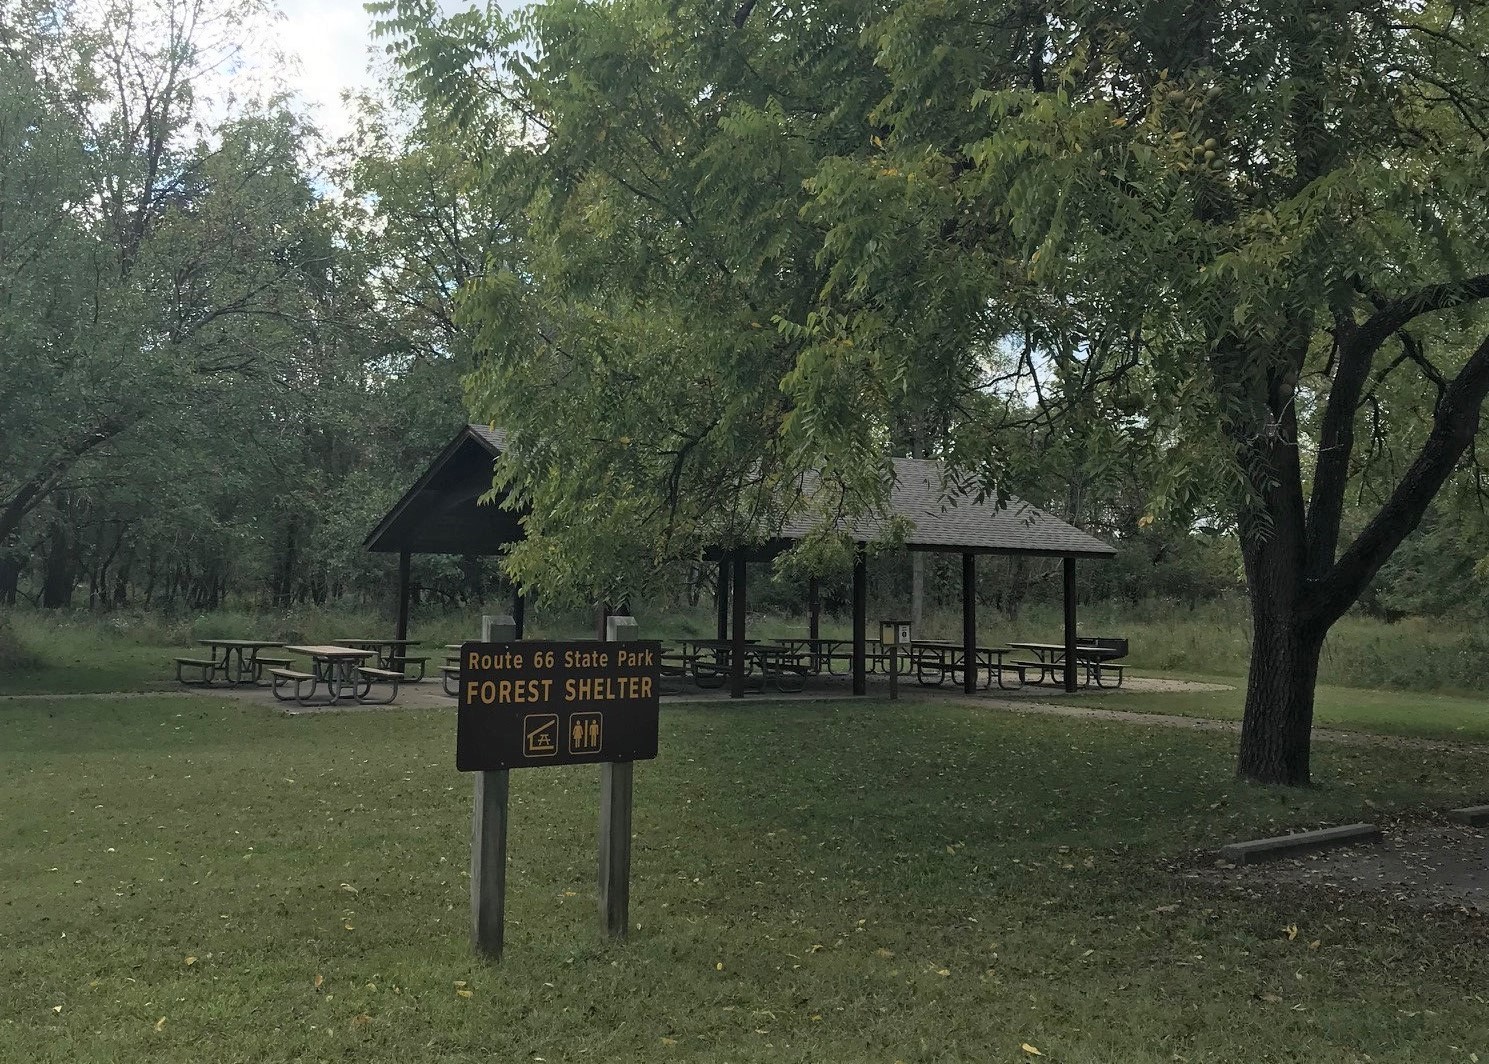 Open picnic shelter with "FOREST SHELTER" sign in foreground